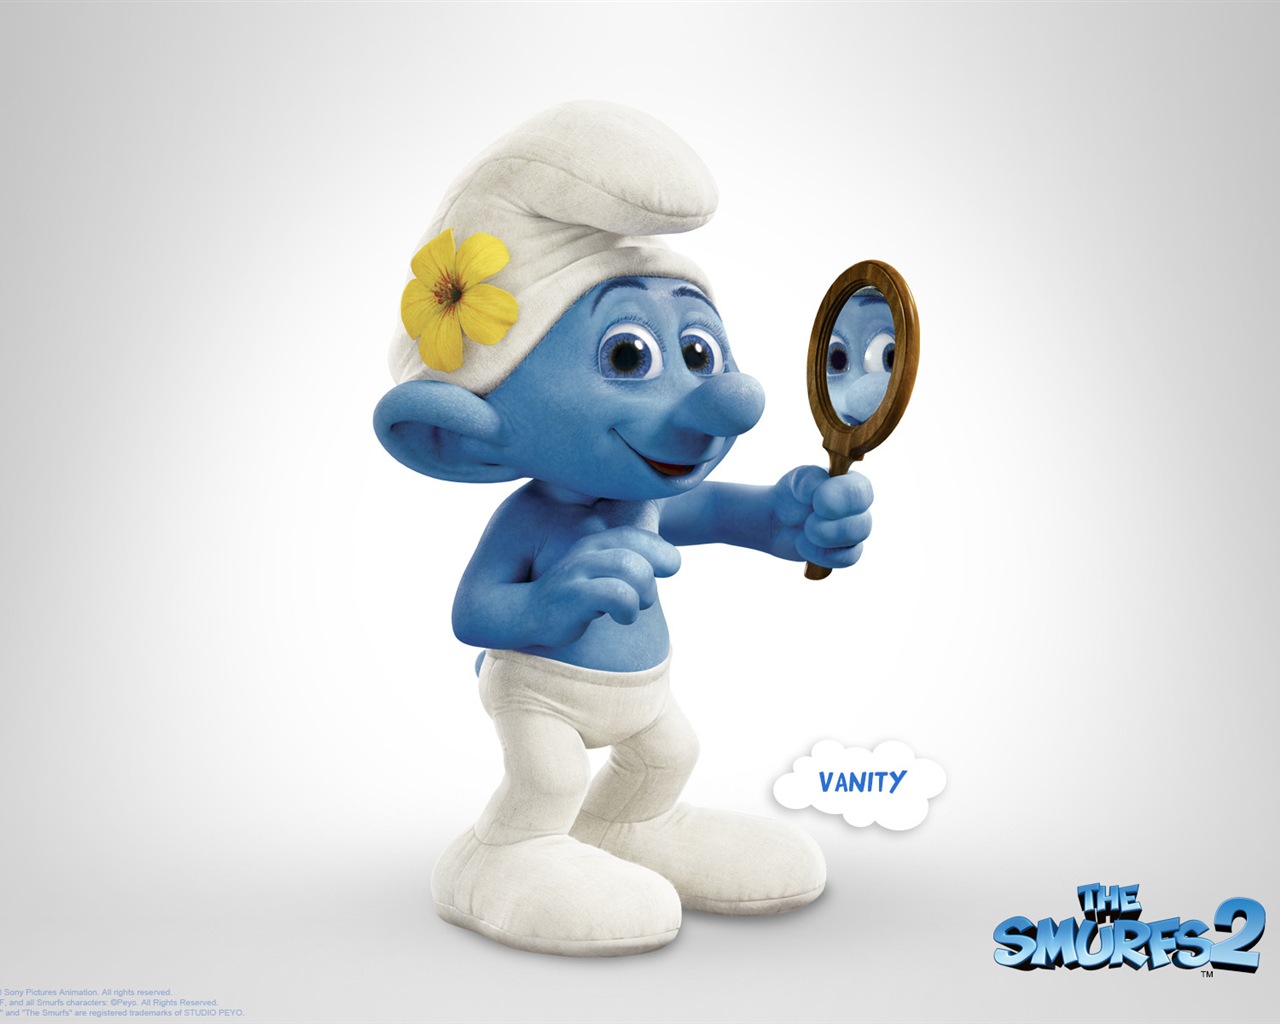 The Smurfs 2 HD movie wallpapers #10 - 1280x1024